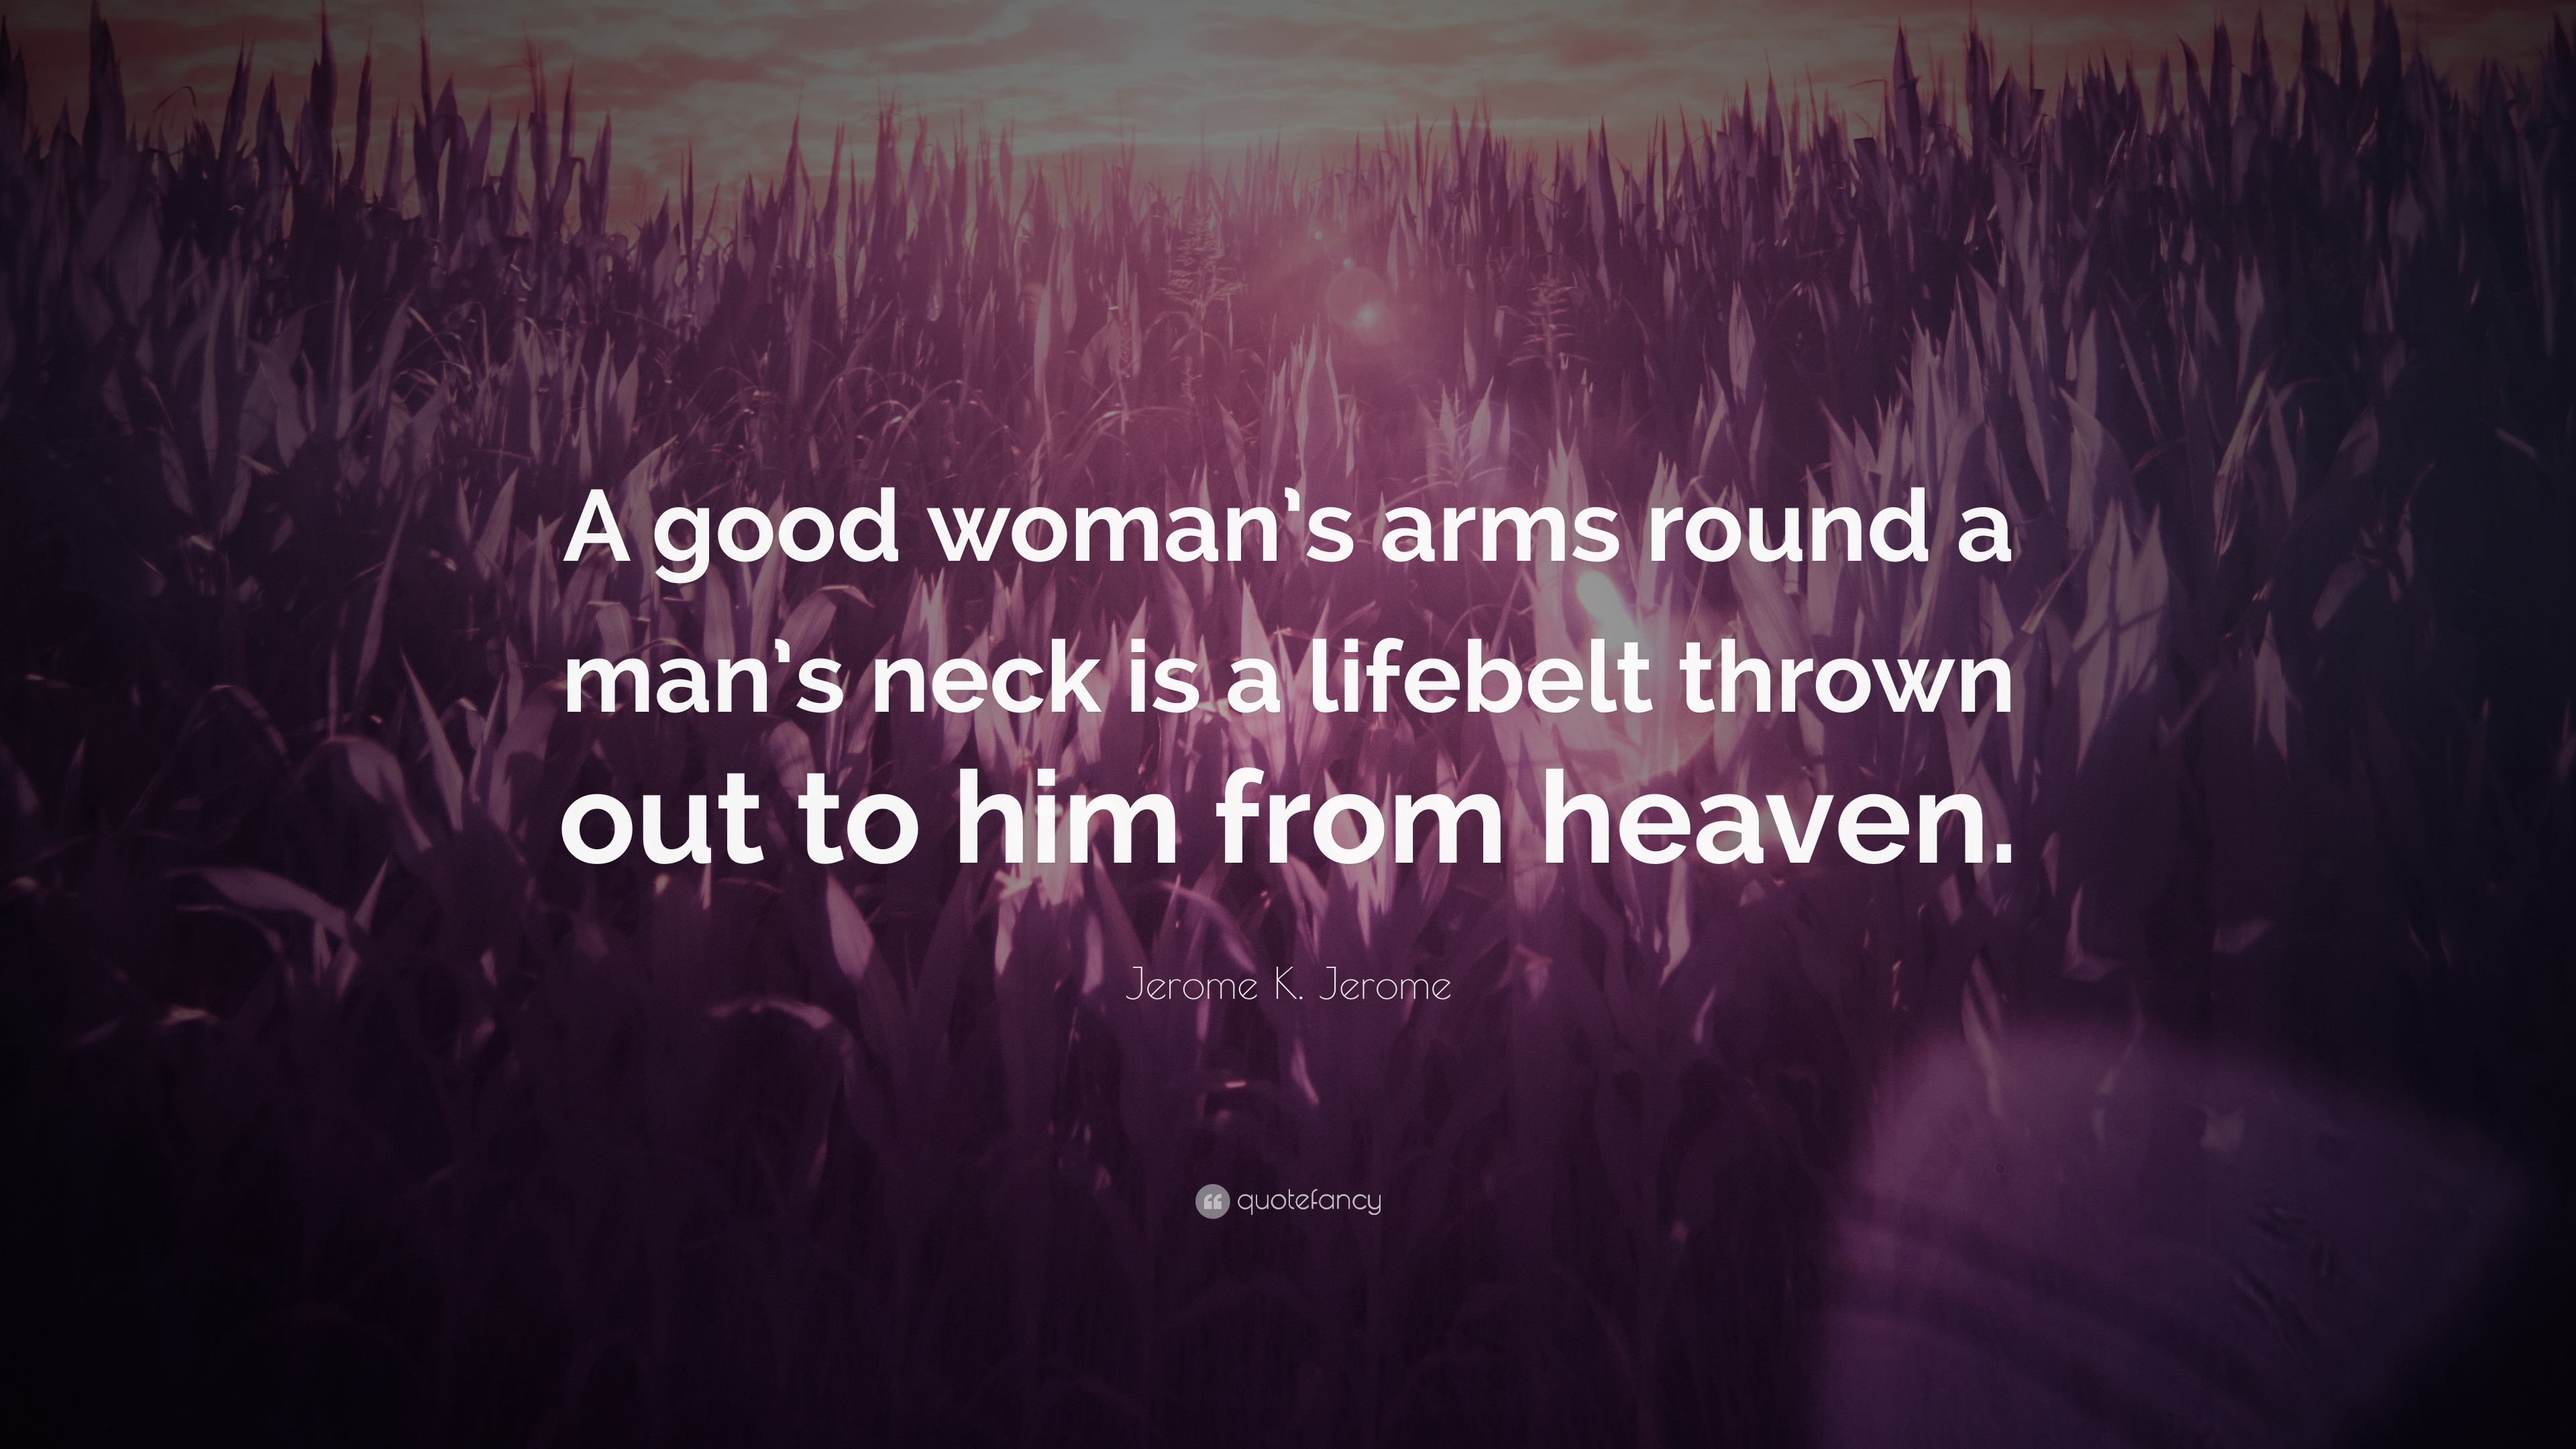 Jerome K Jerome Quote “A good woman s arms round a man s neck is